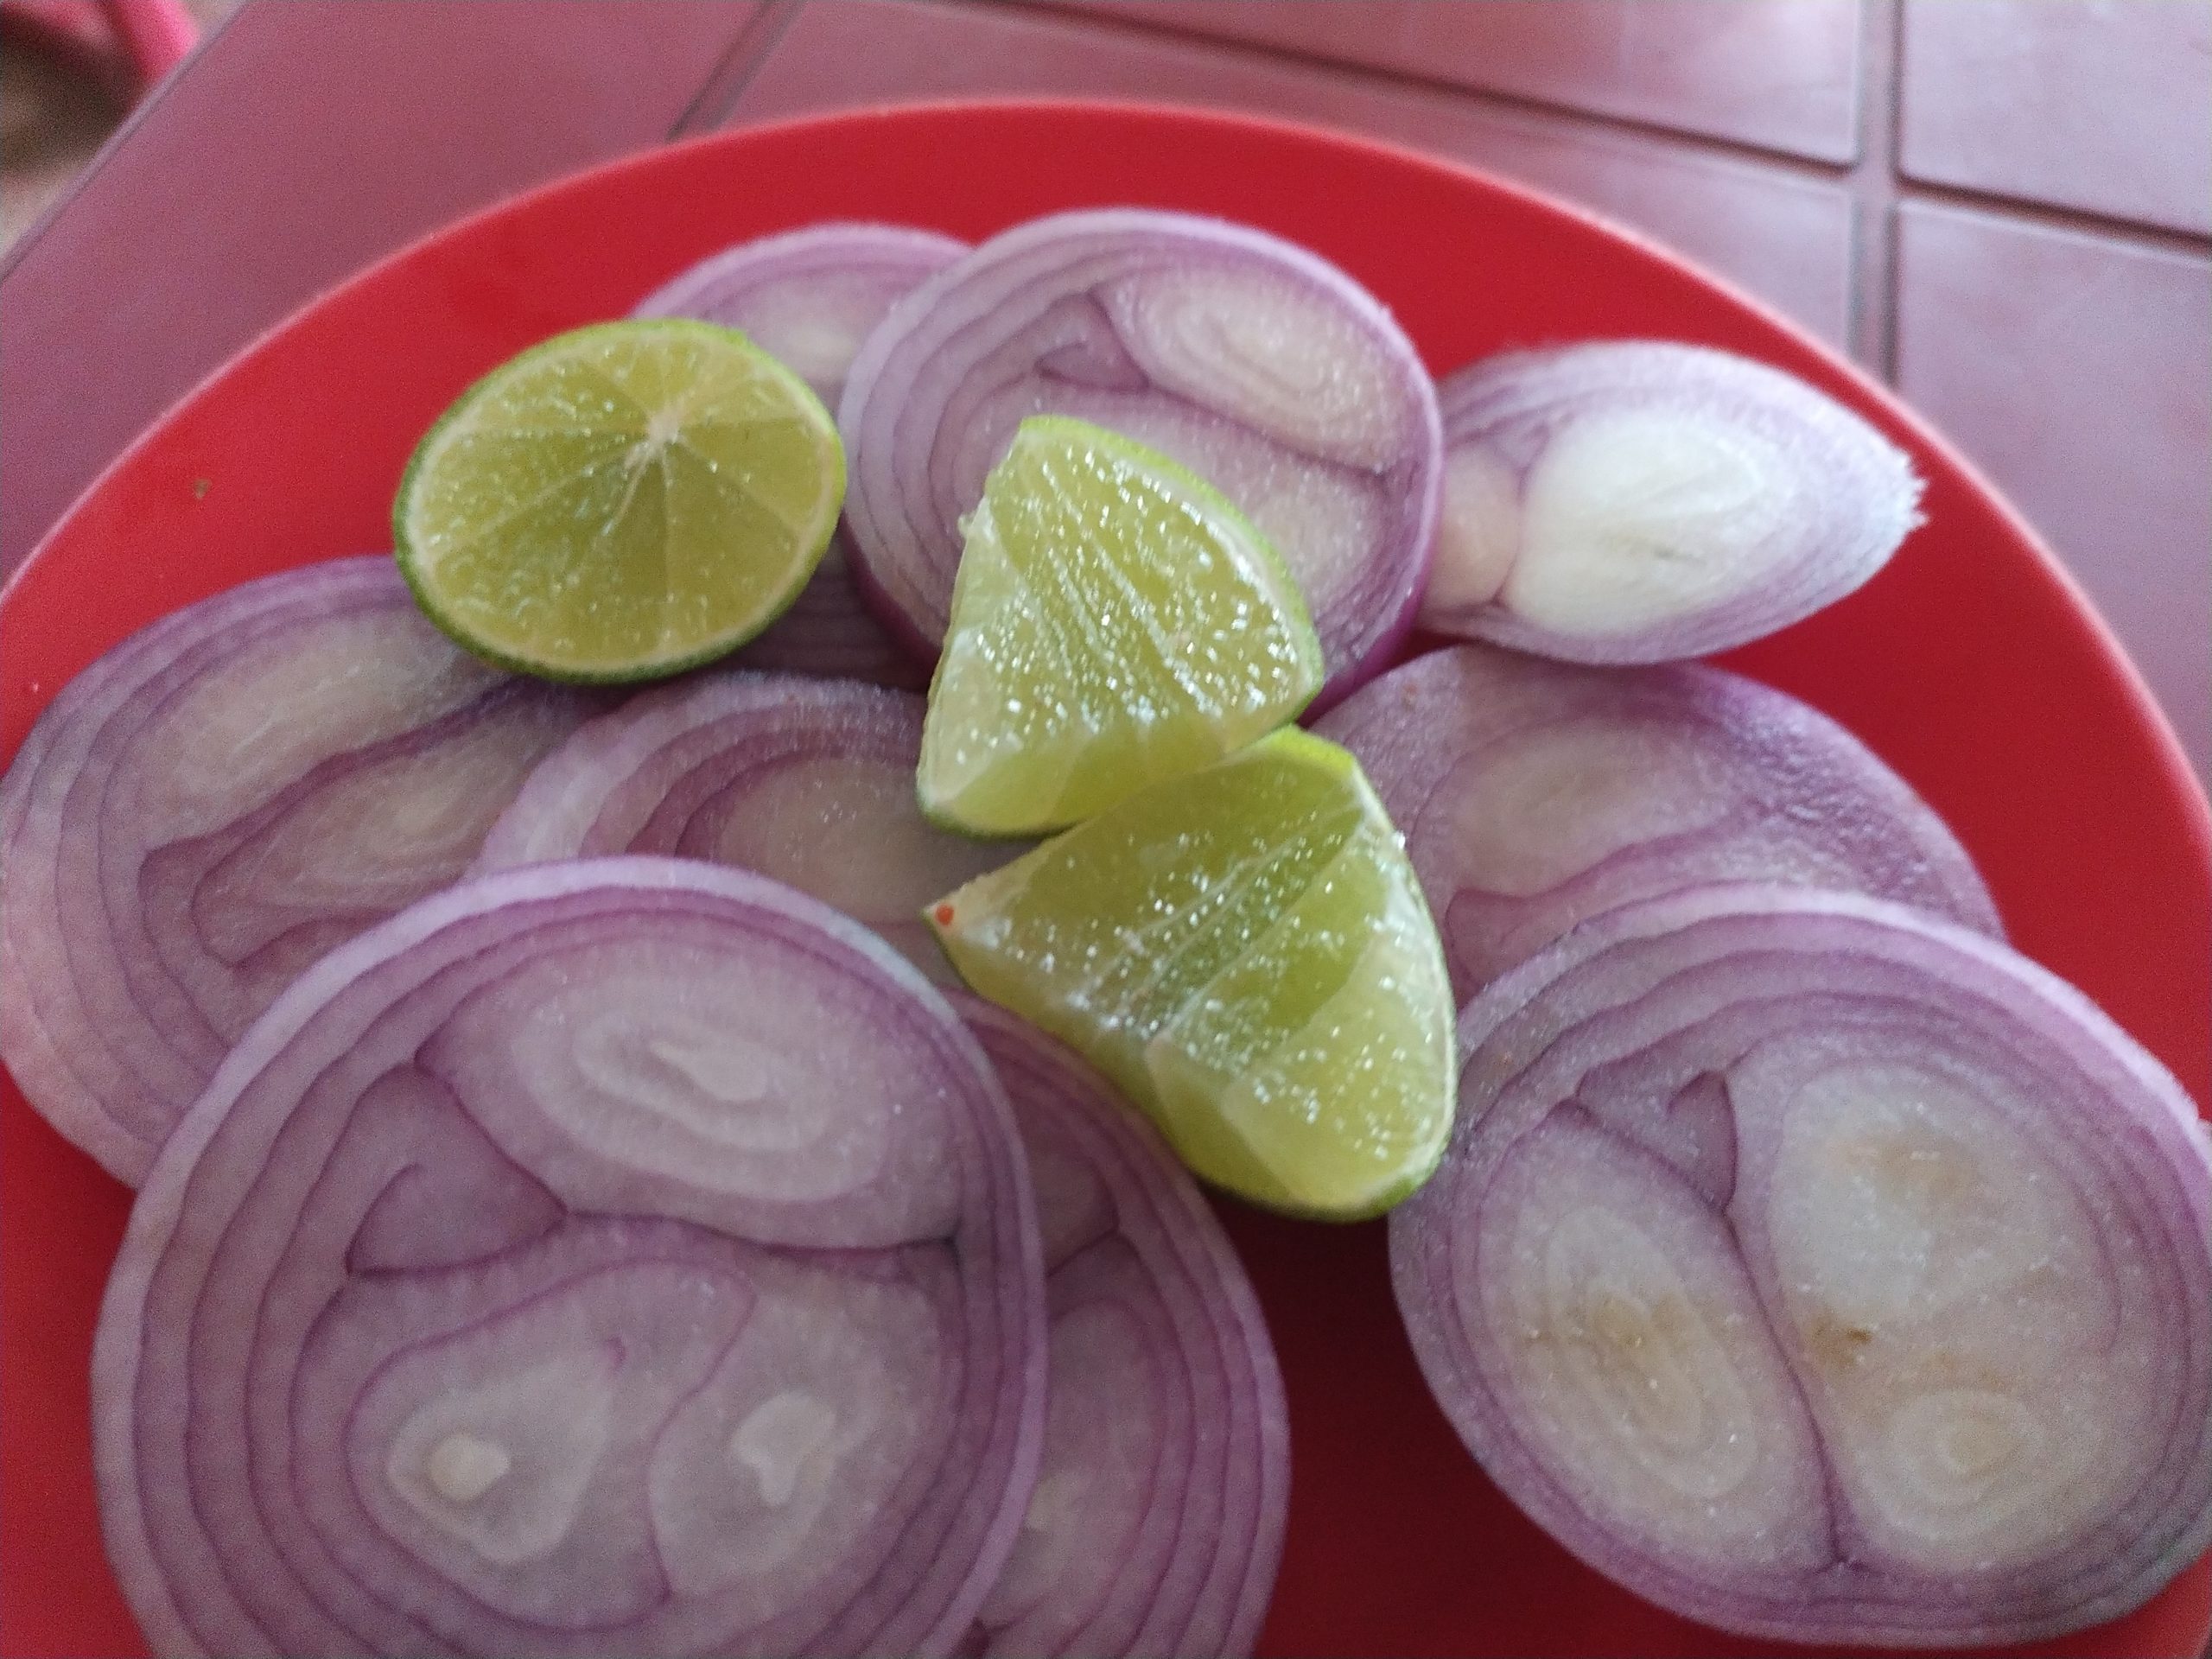 Lemon pieces with onions